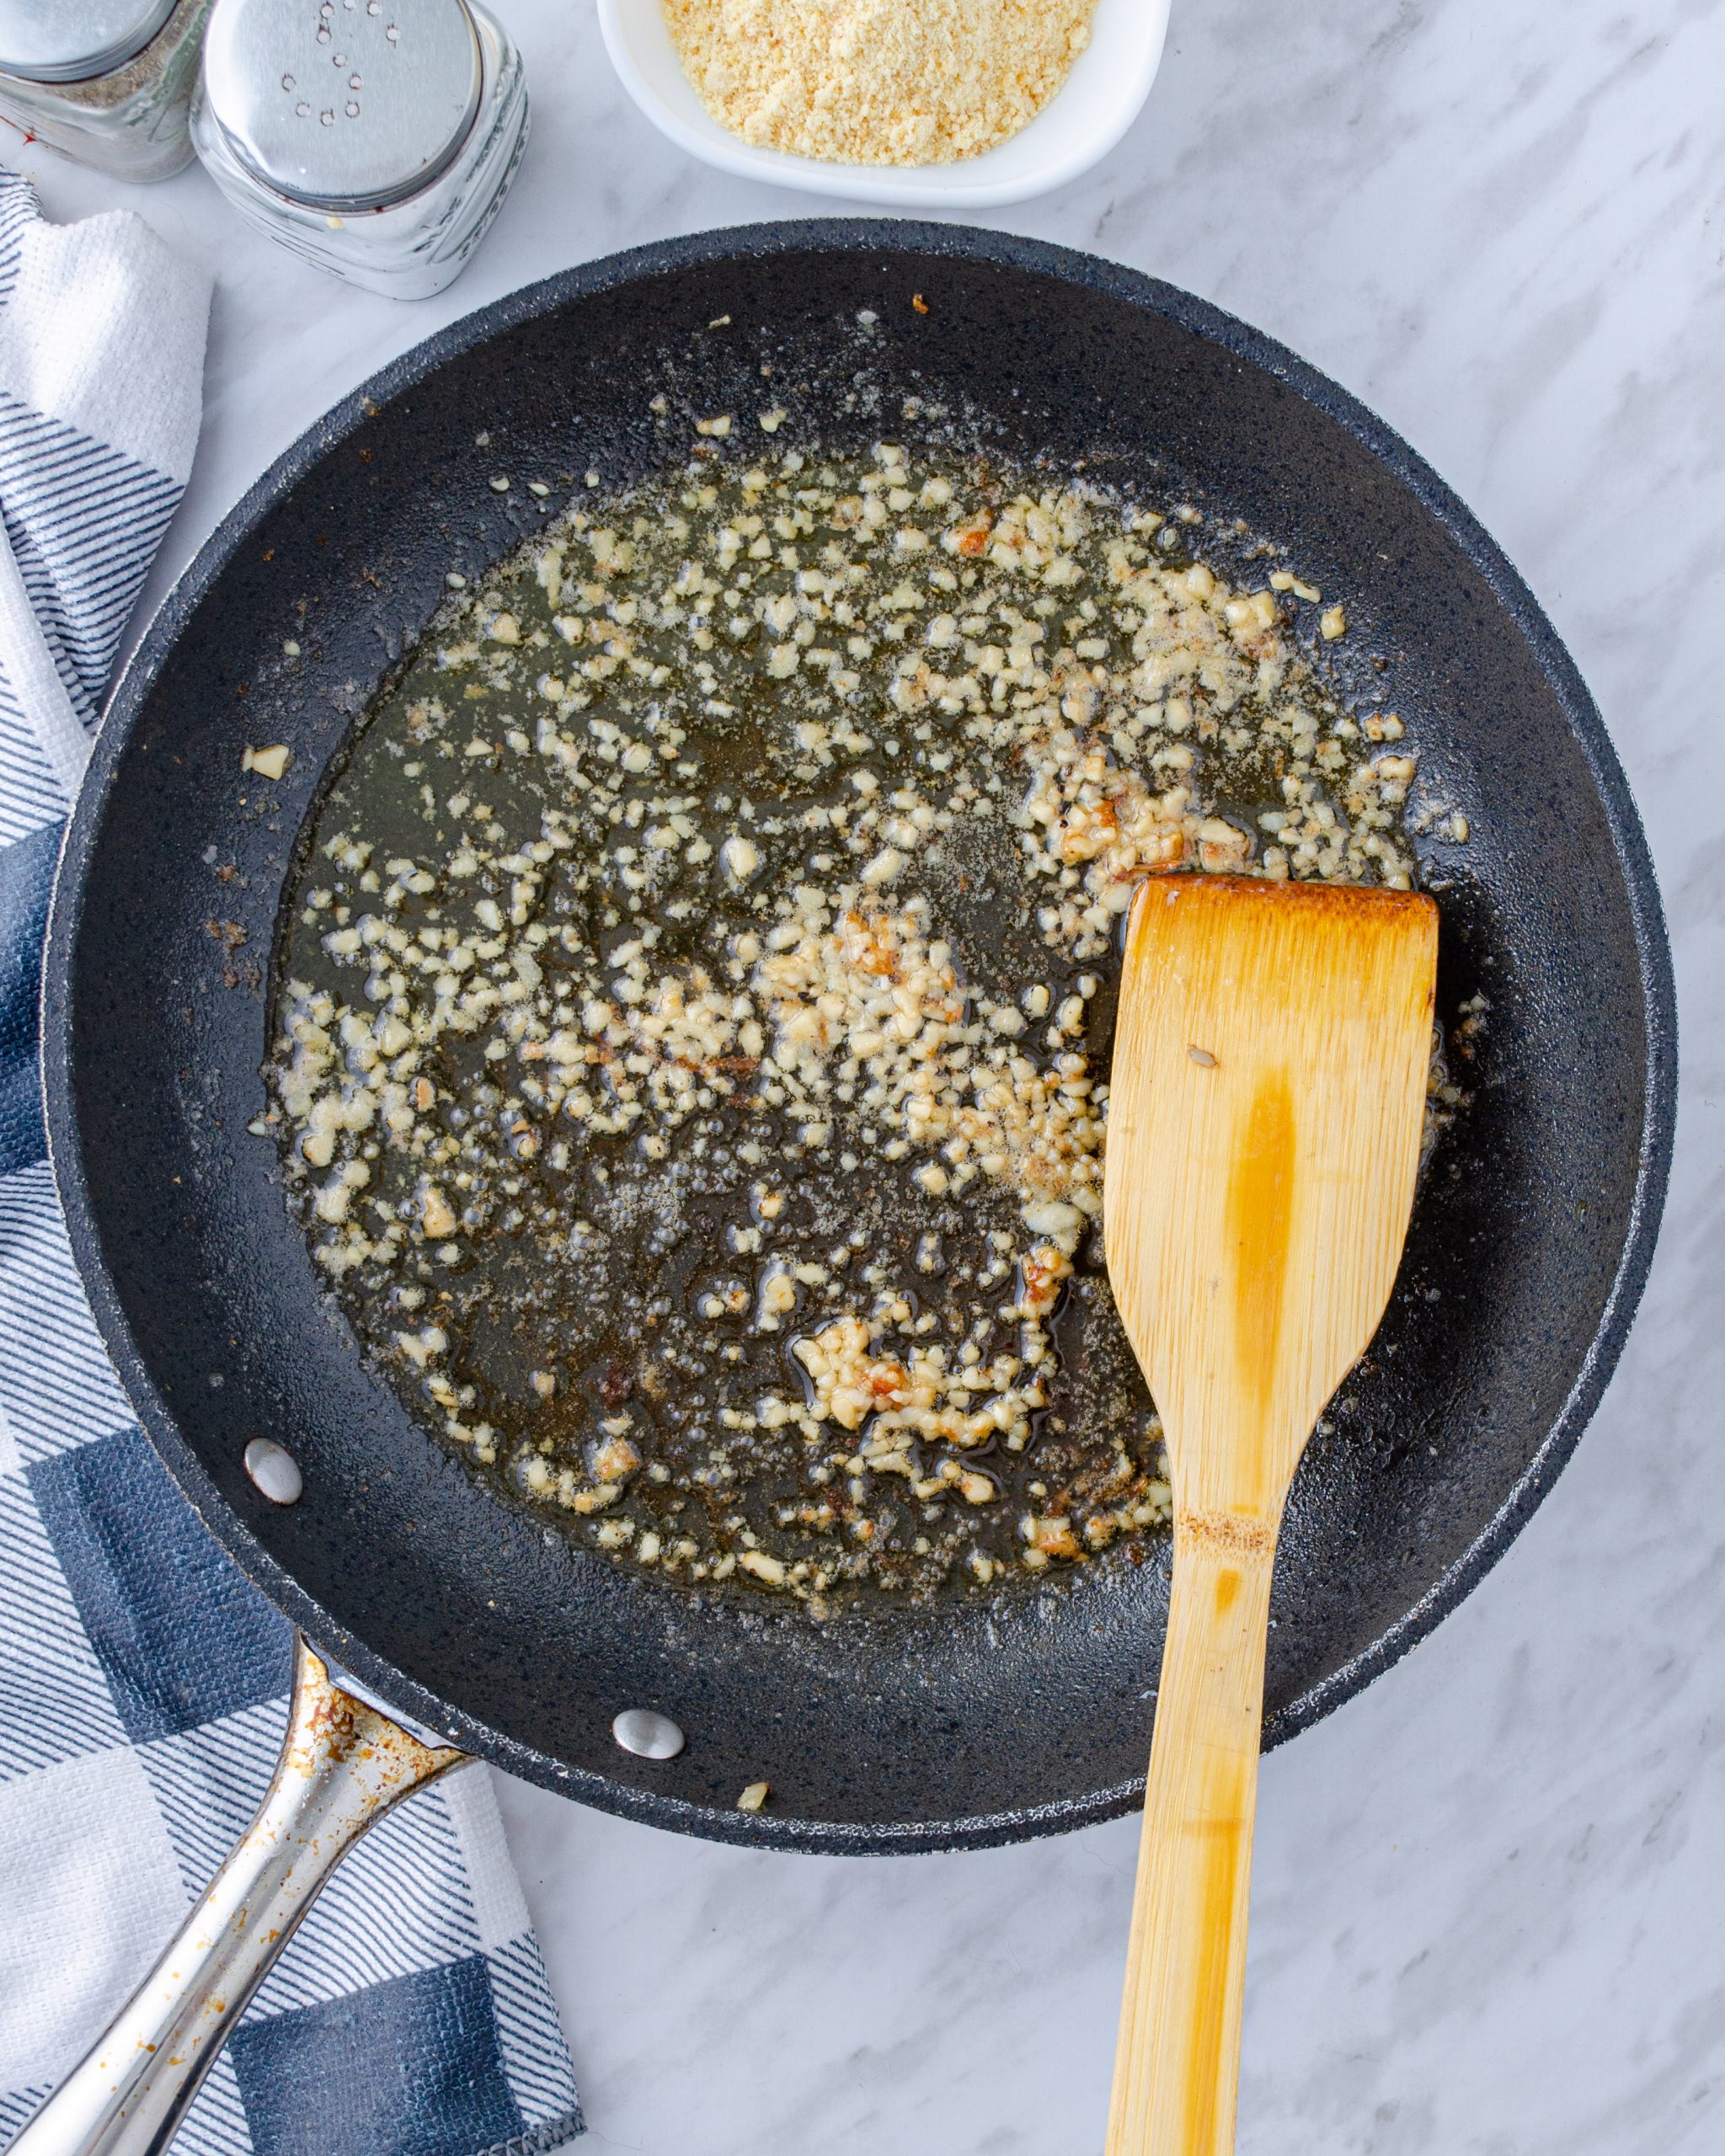 Reduce the heat to medium, and add the butter and garlic to the skillet. Saute until the butter is melted.